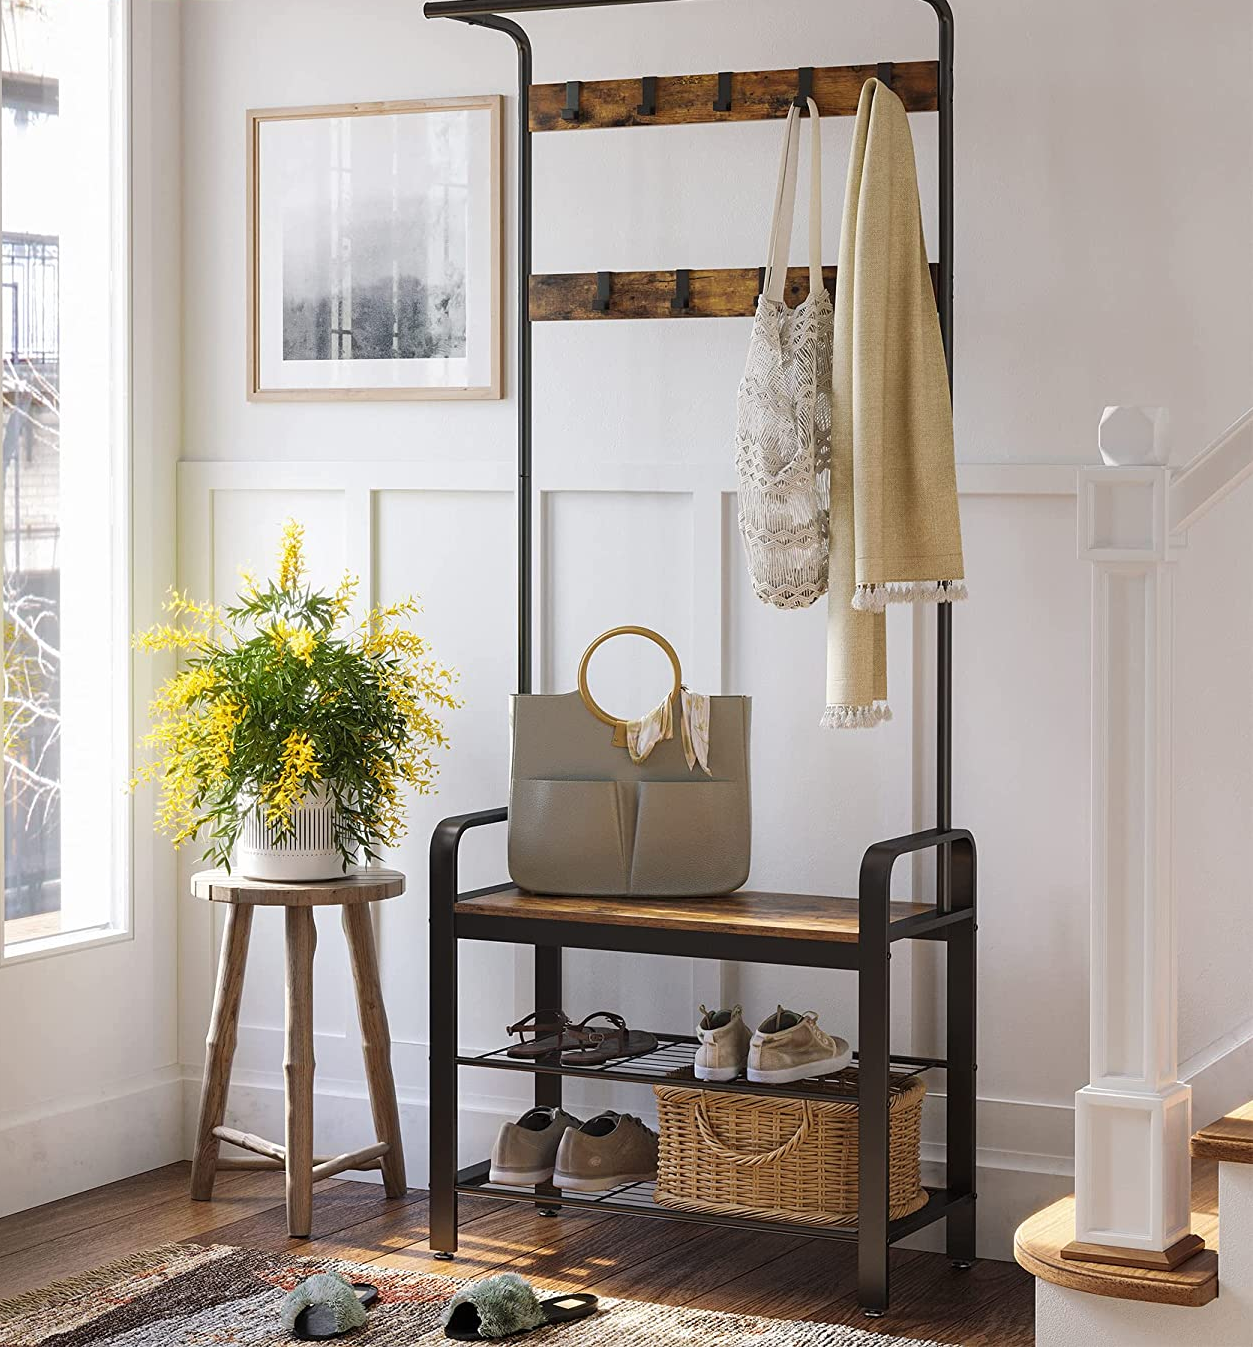 the coat and shoes storage rack in an entryway